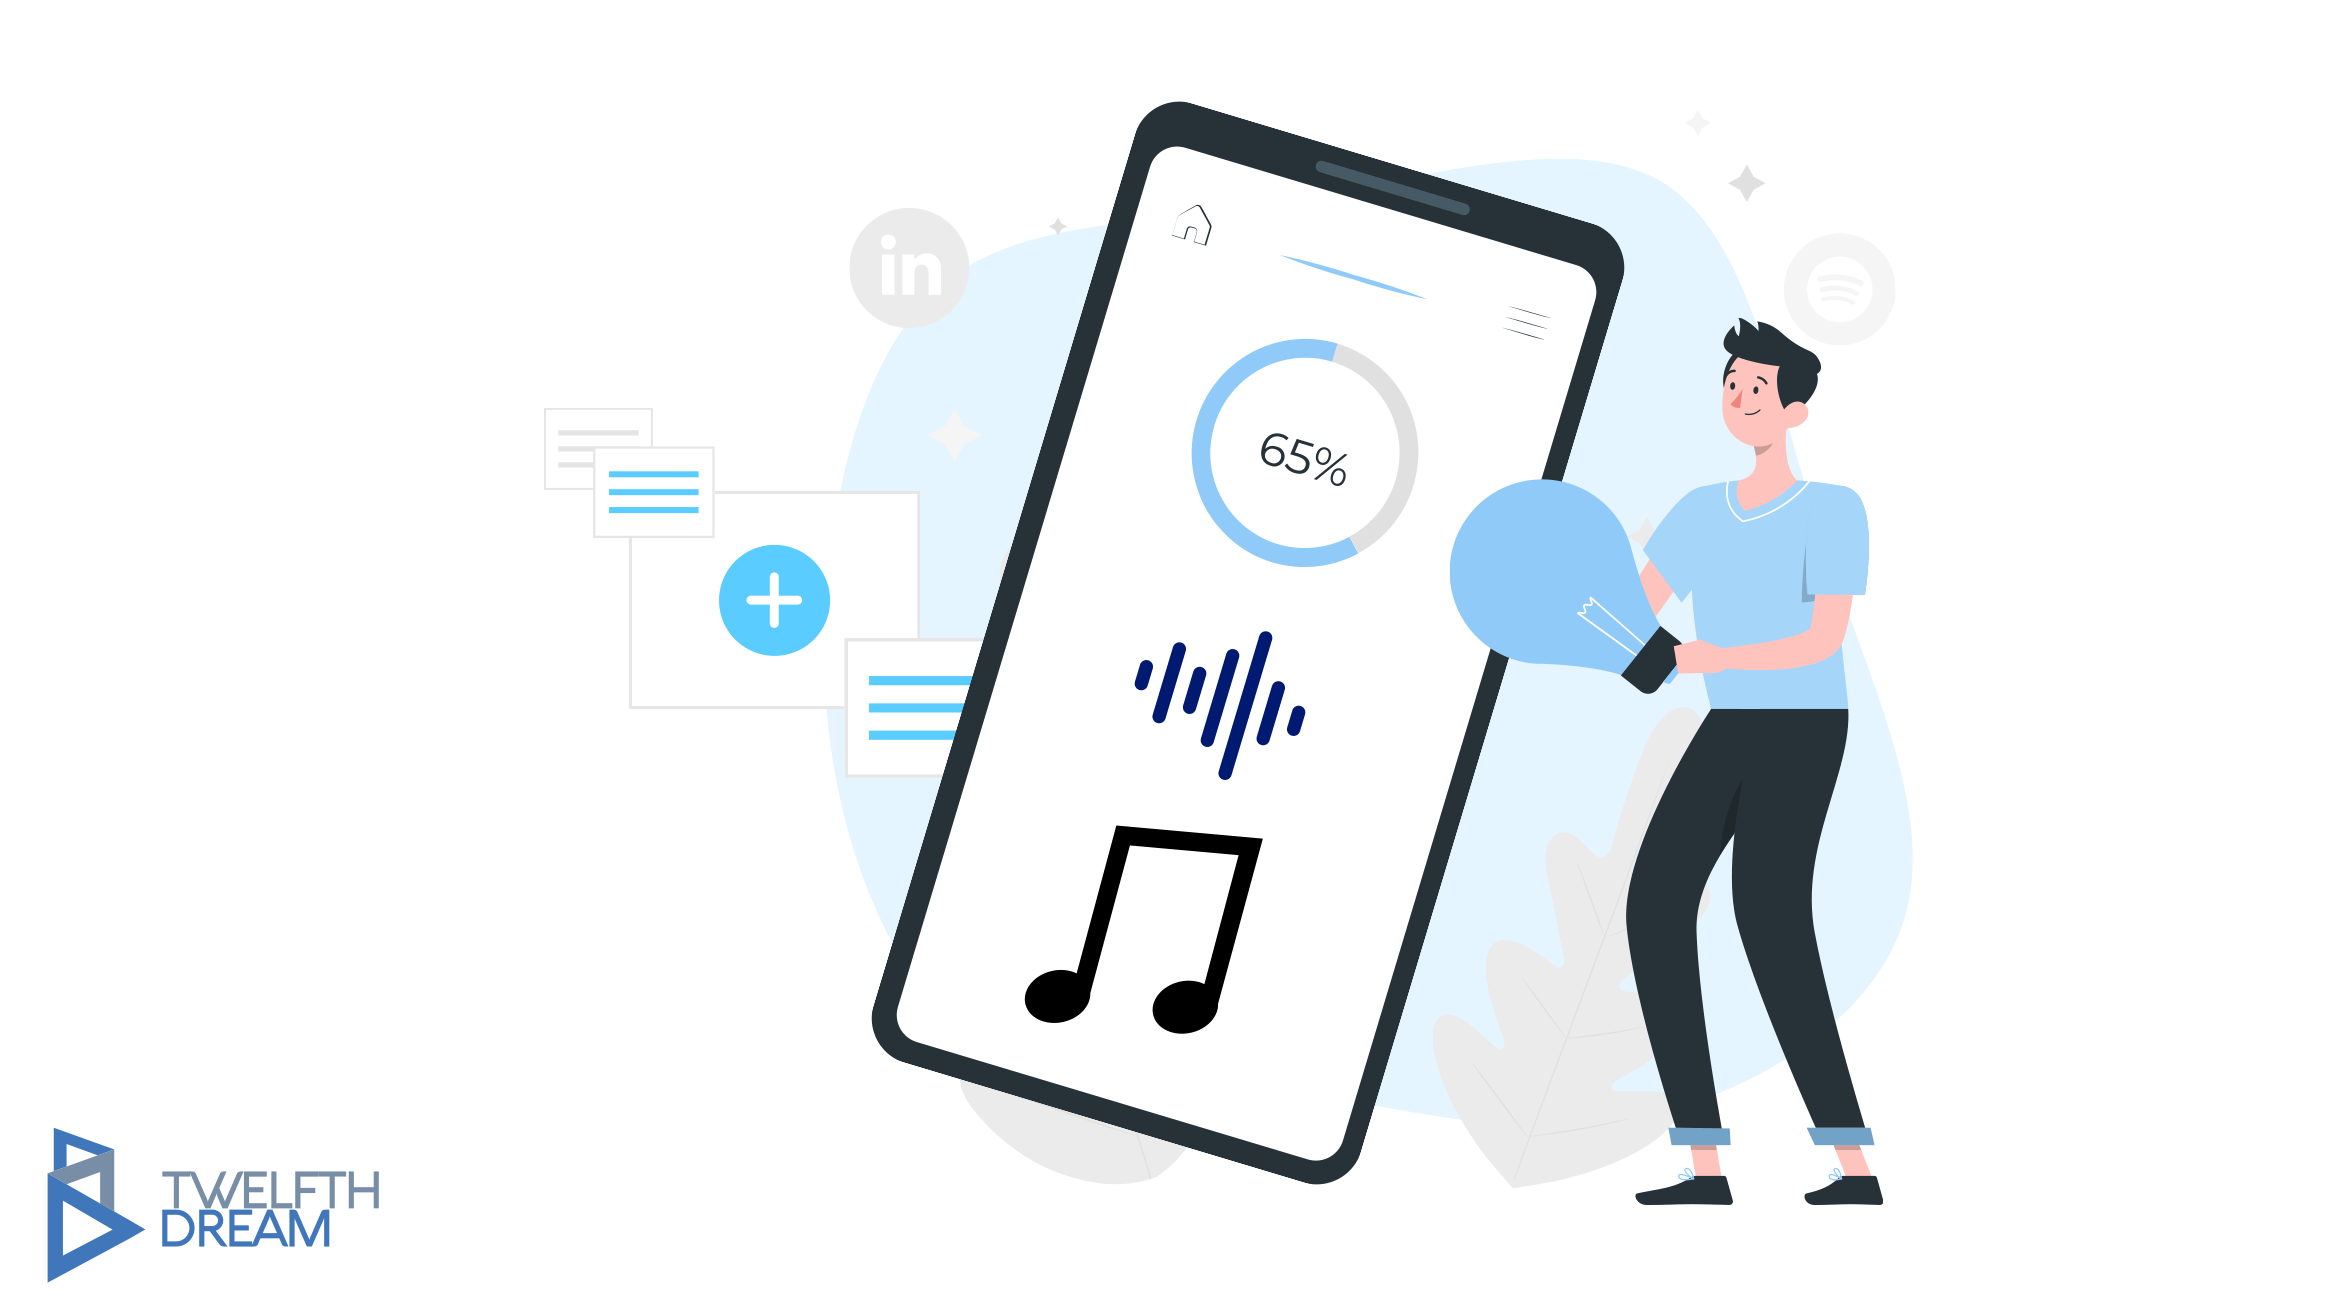 How to make a music app?